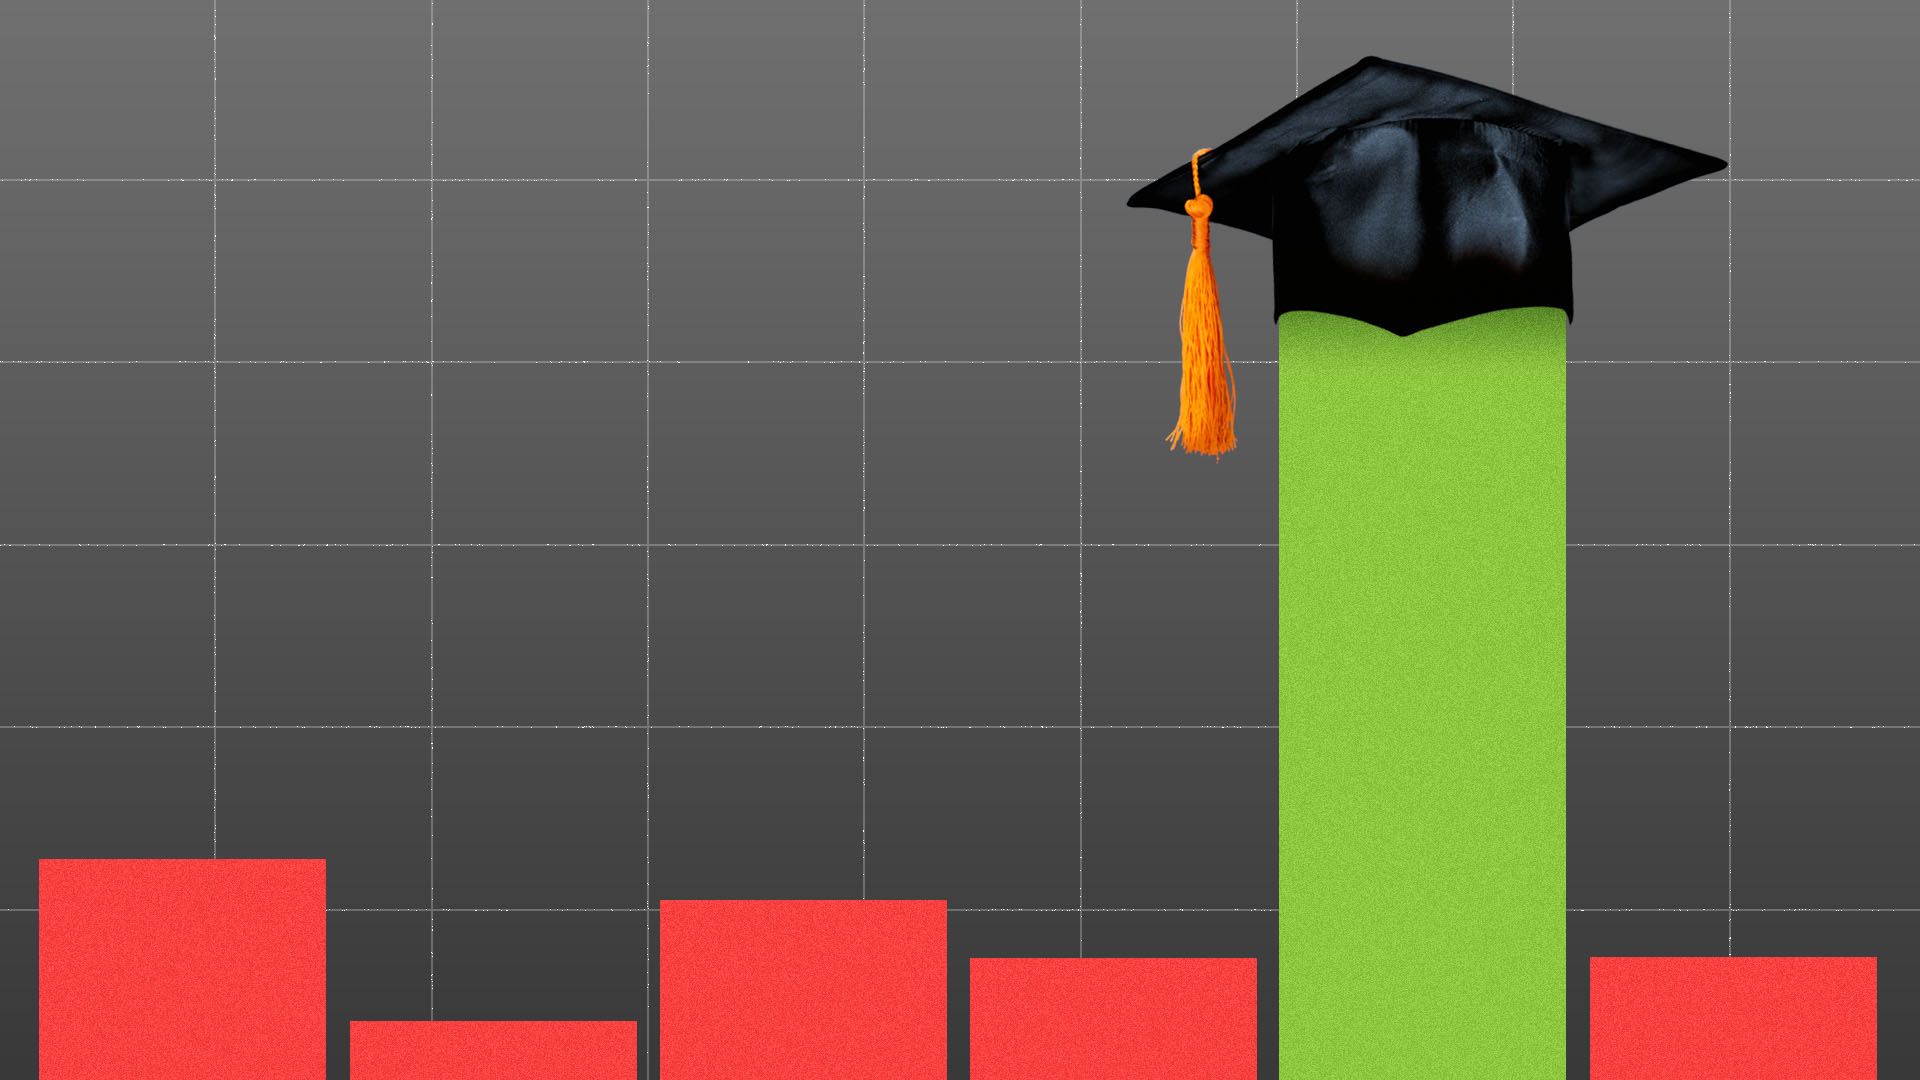 llustration of a bar chart with the highest bar sporting a college graduation cap